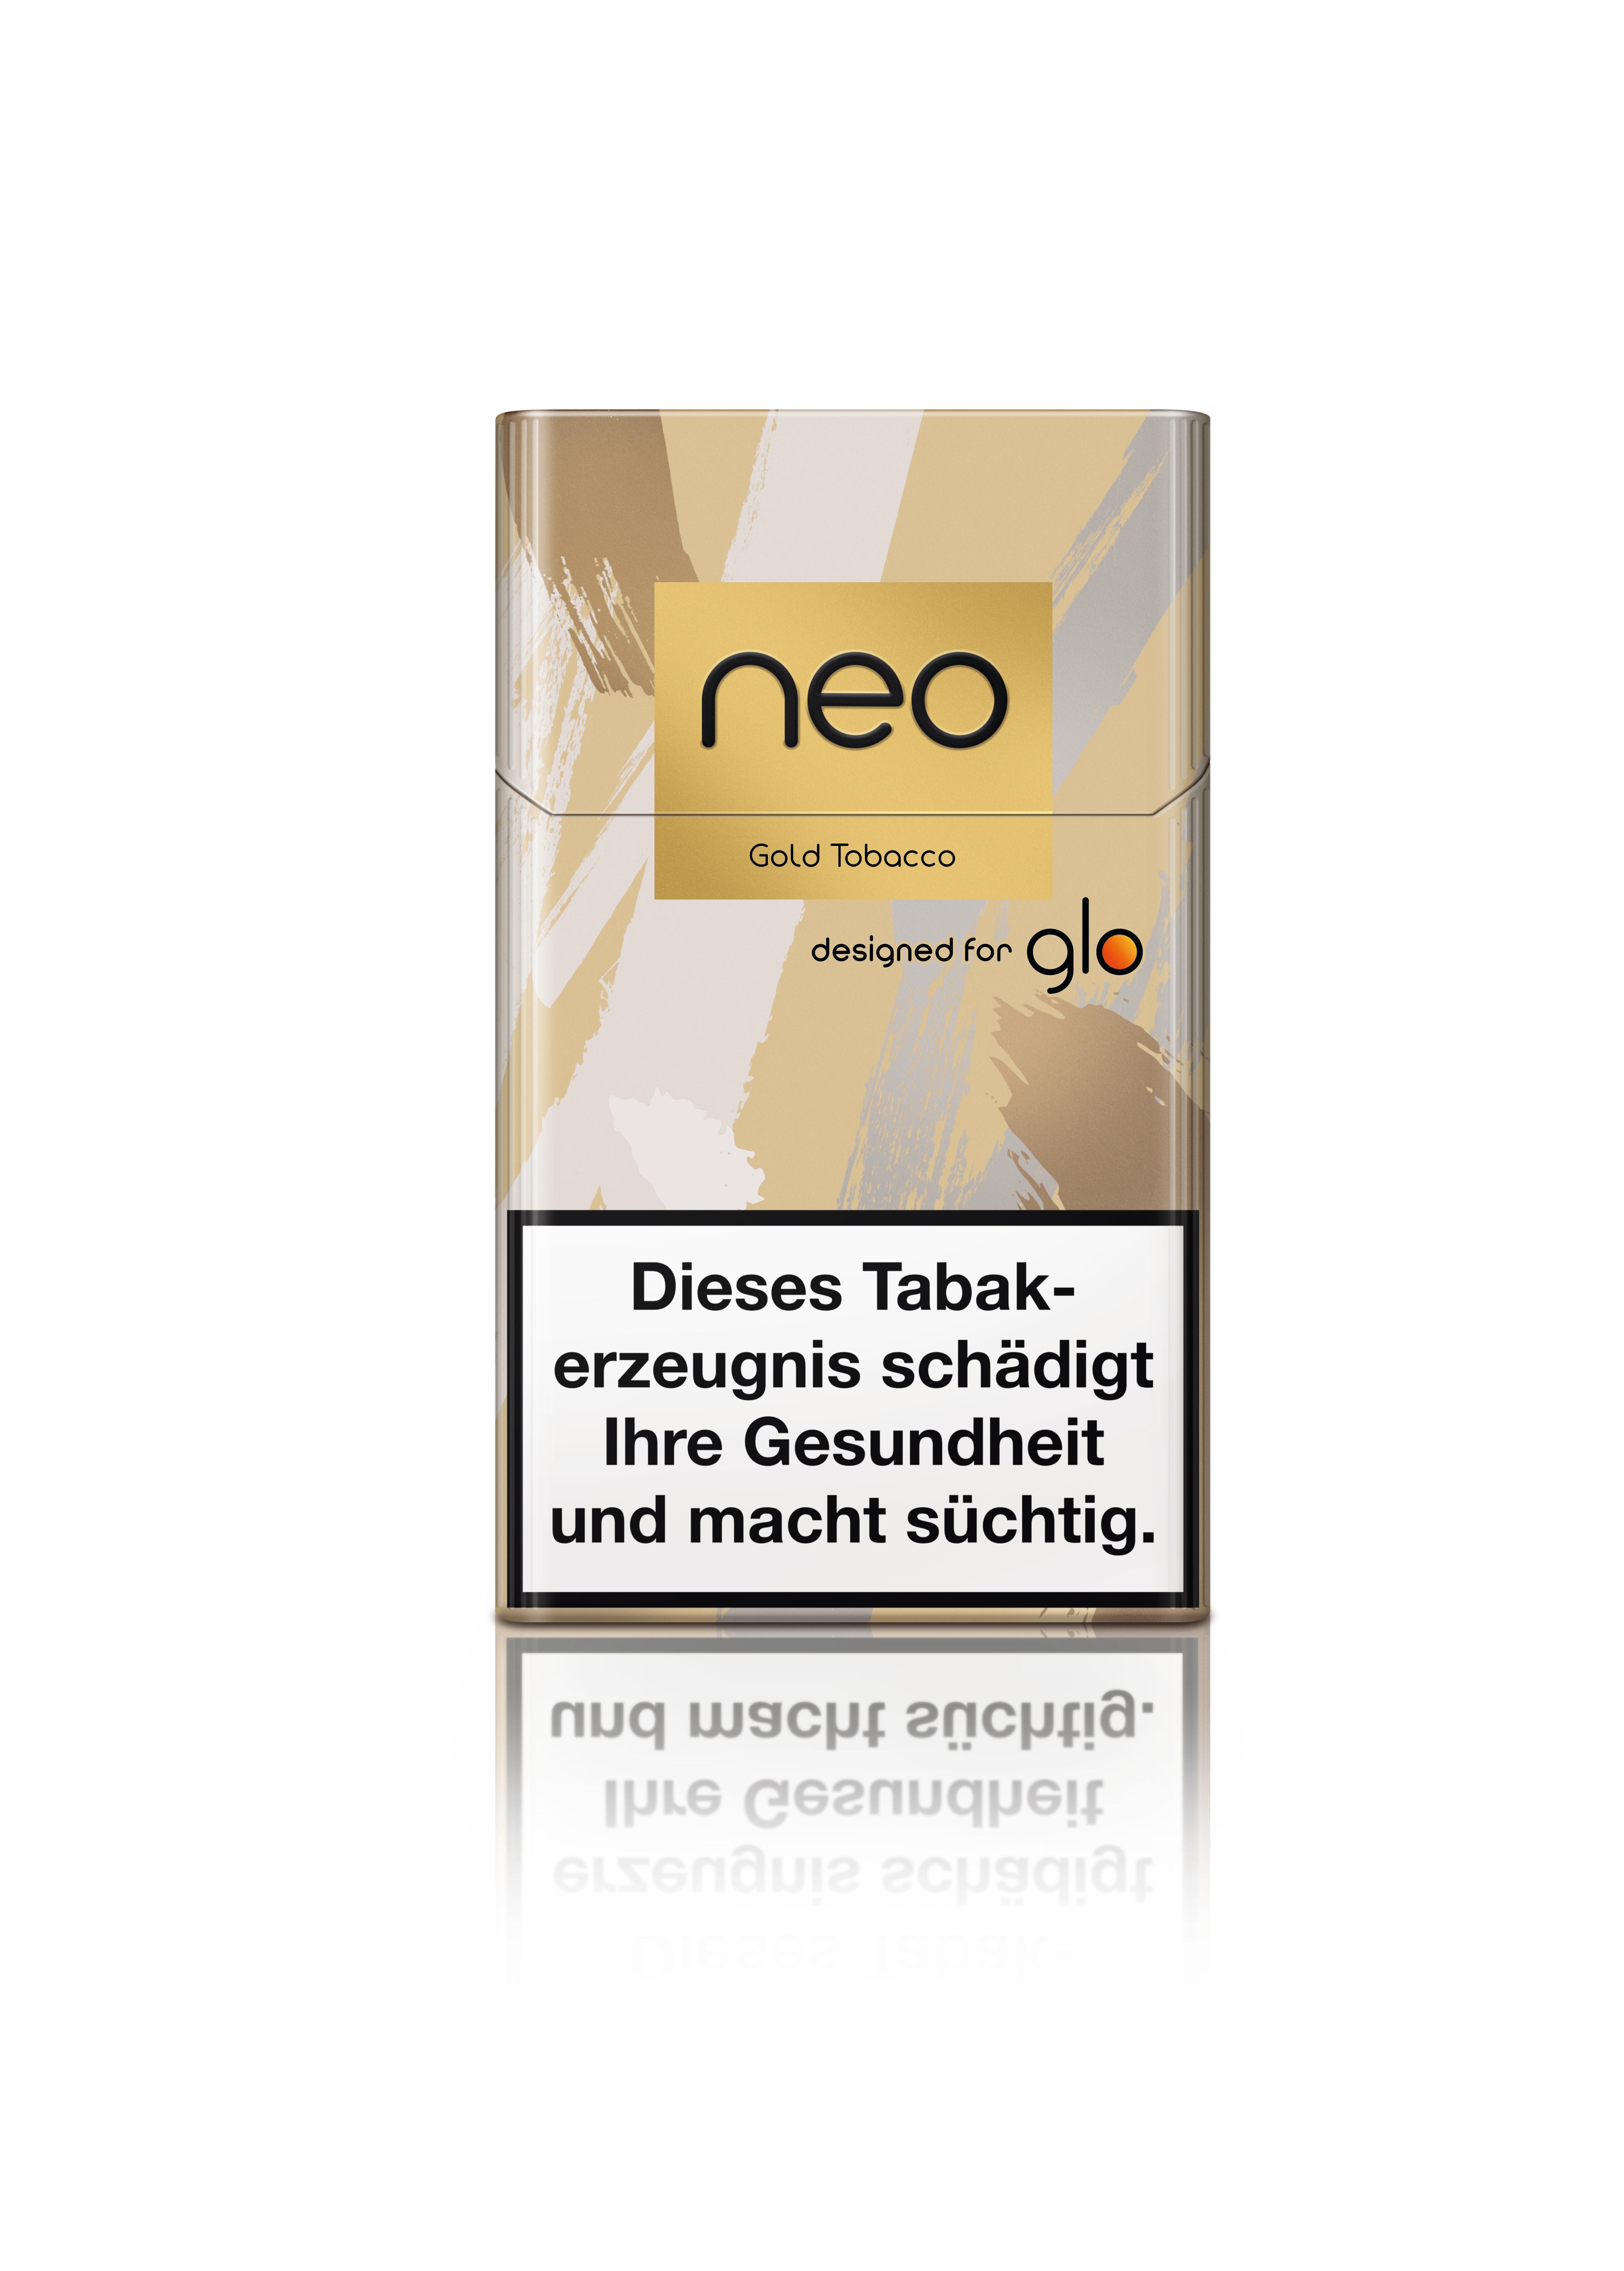 neo Gold Tobacco 1 Packung